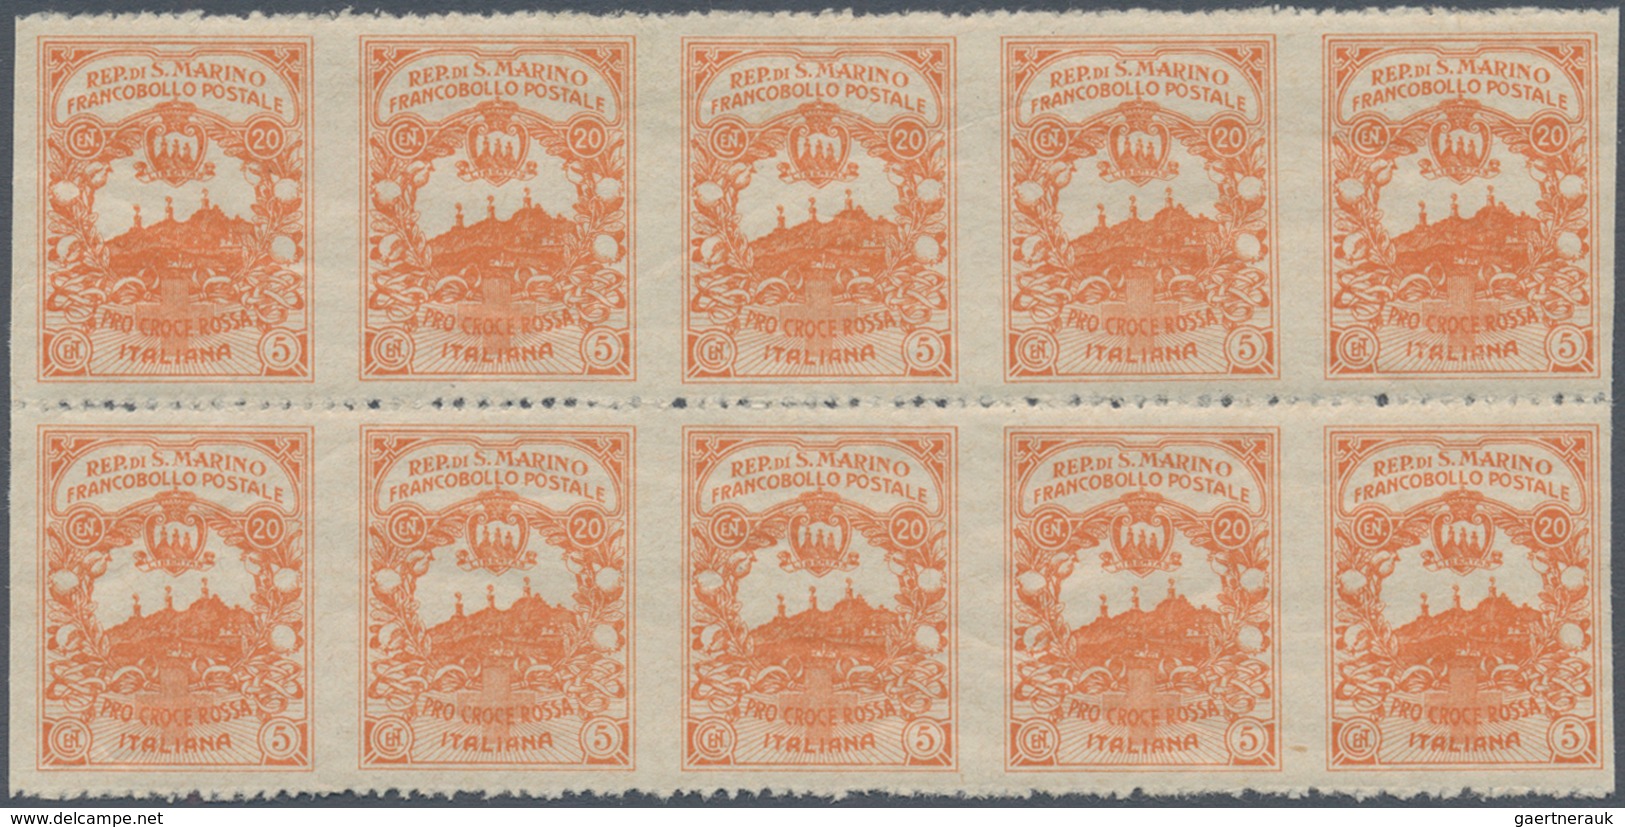 Thematik: Rotes Kreuz / Red Cross: 1916, San Marino. NON-ISSUED Stamp 20+5c, Orange, PRO CROCE ROSSO - Rode Kruis